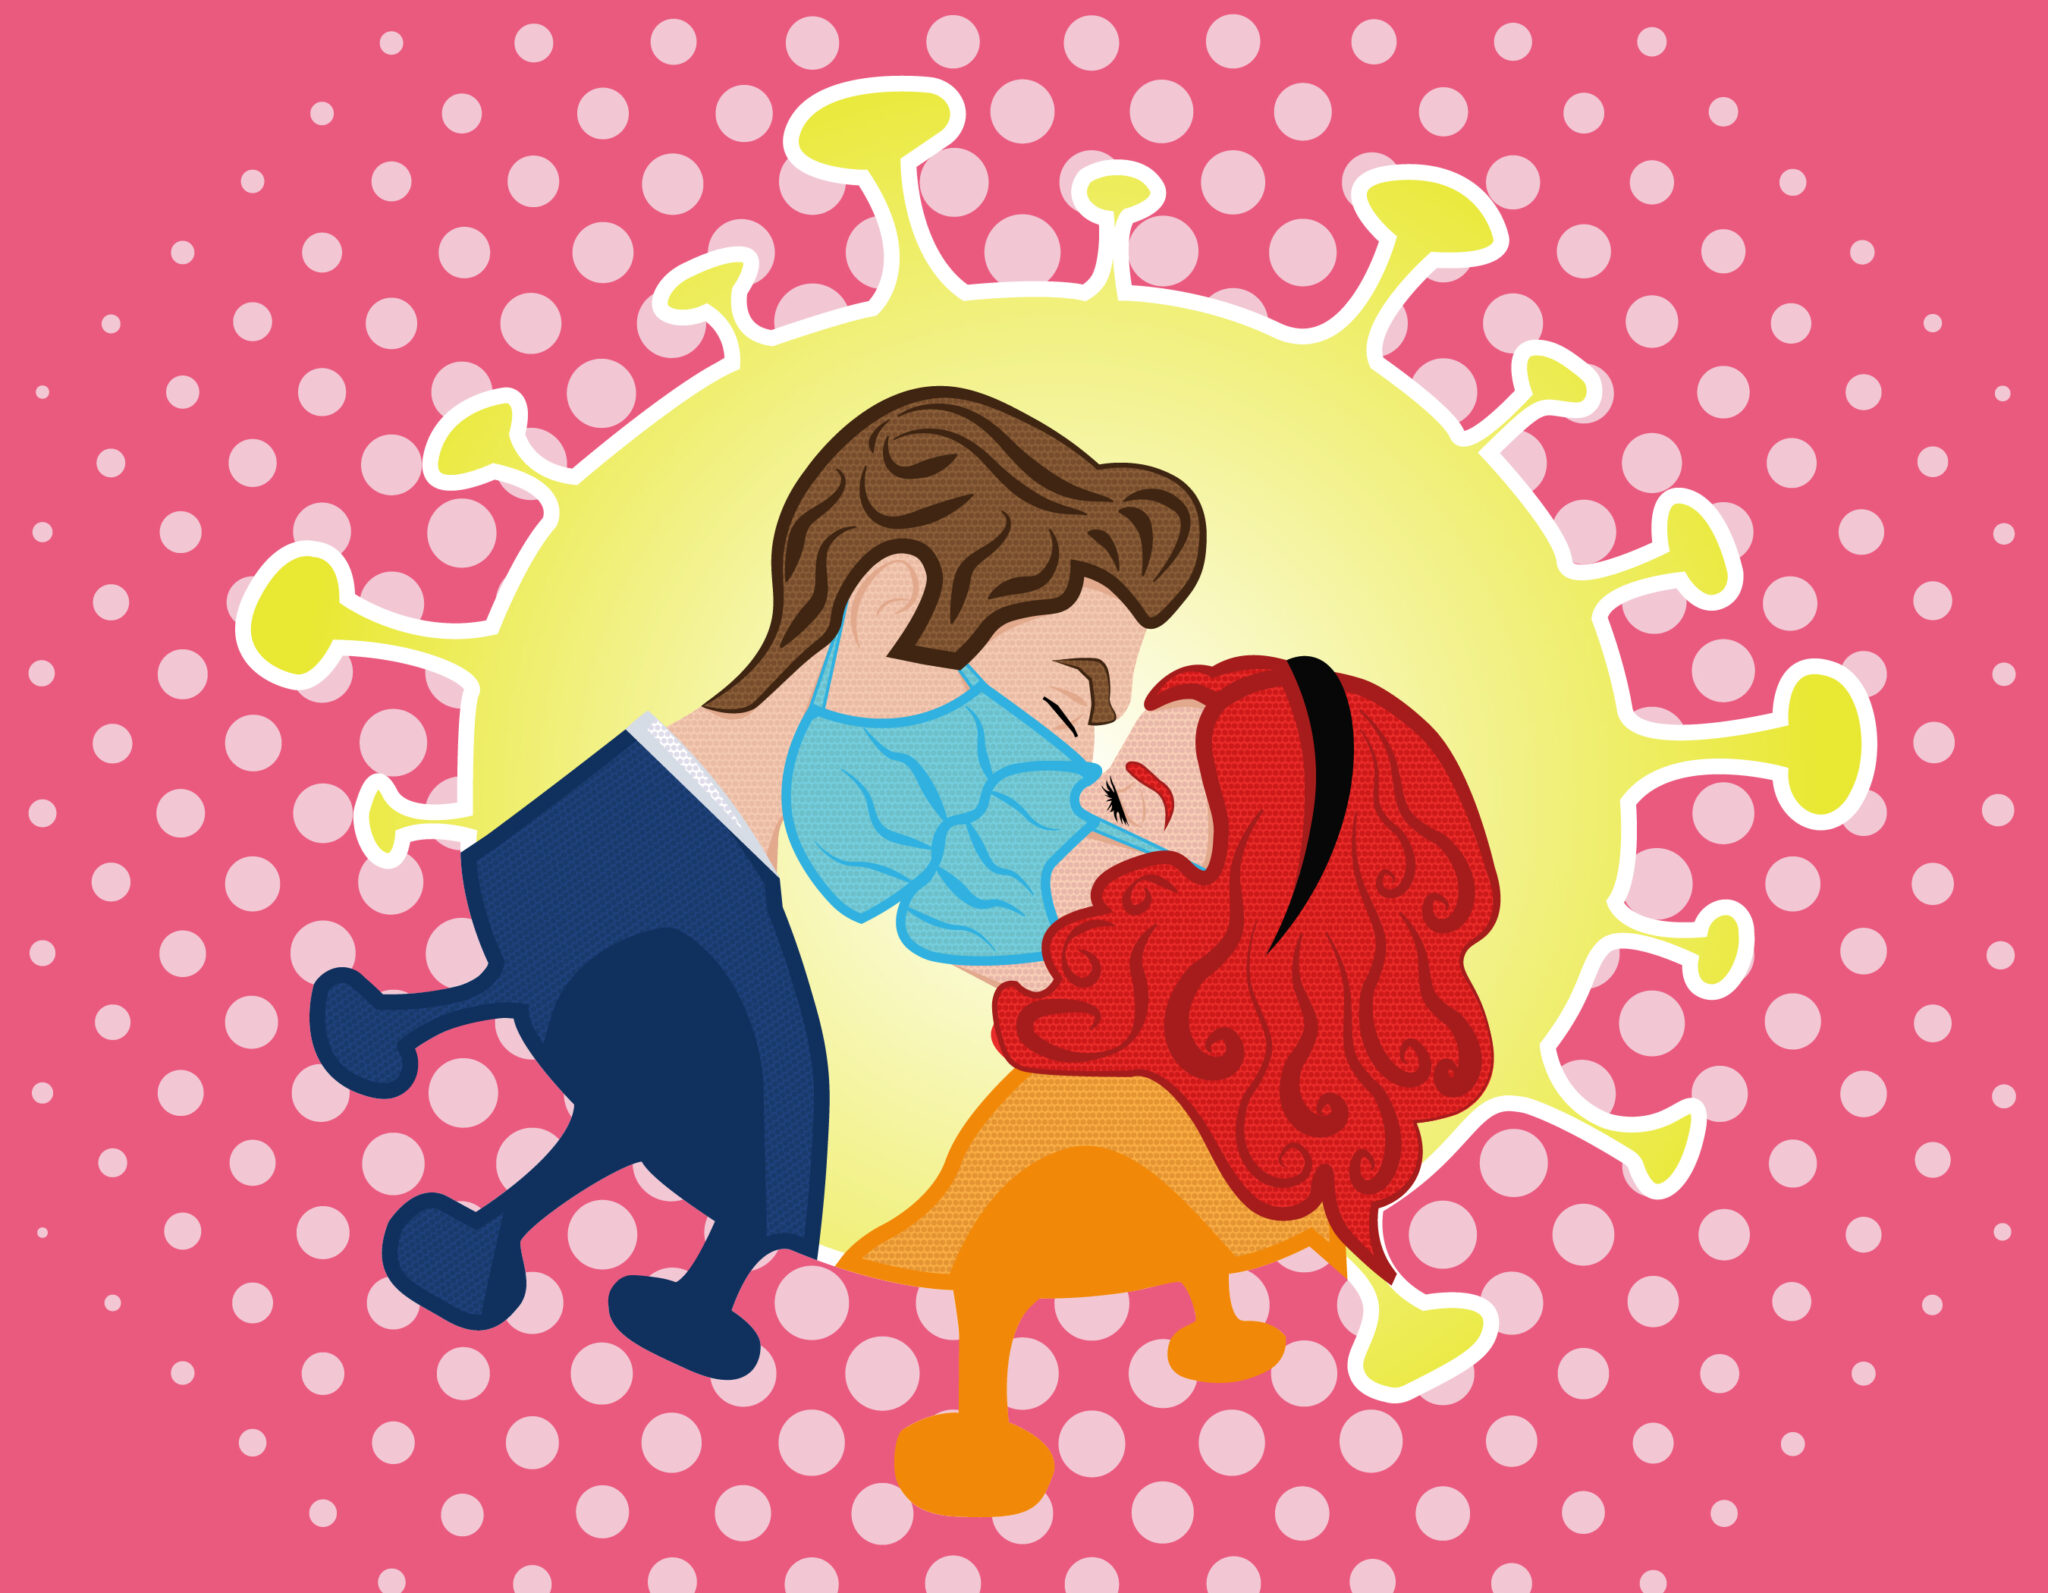 Illustration of a male and female wearing blue surgical masks while kissing.